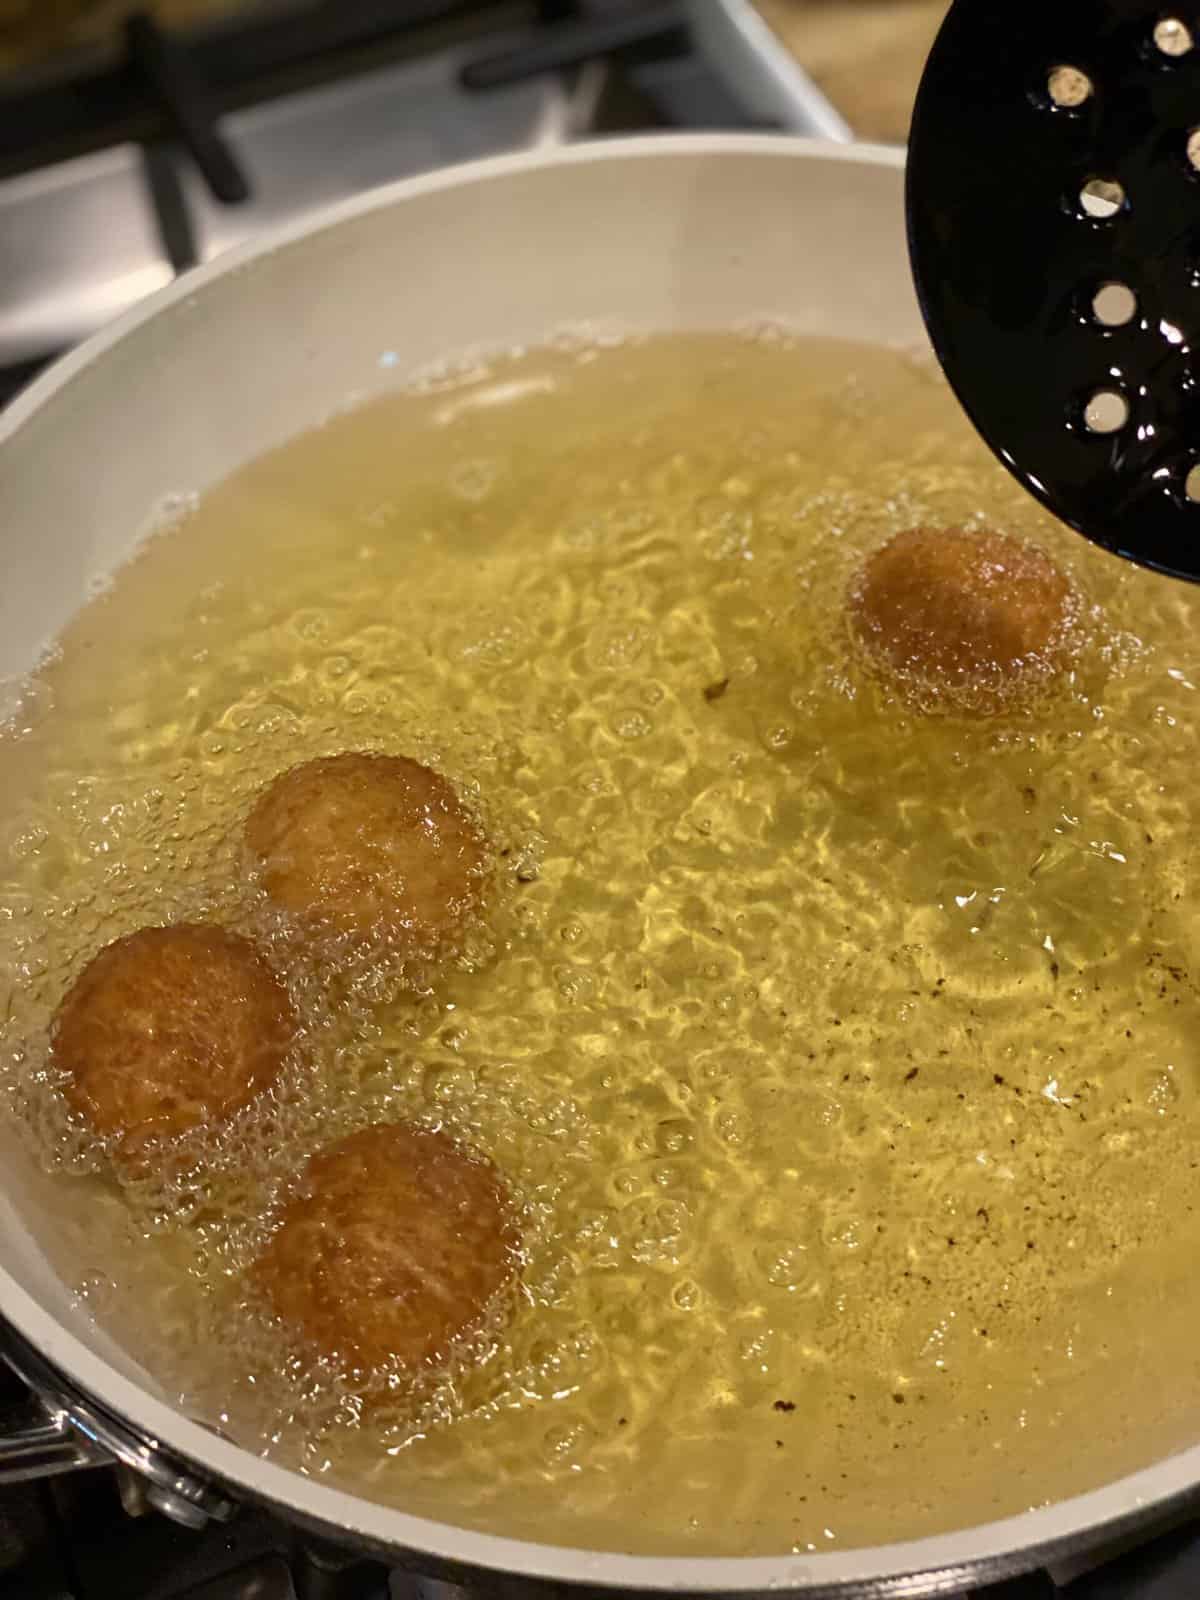 A deep cooking pot filled with hot oil and nicely browned gulab jamun.